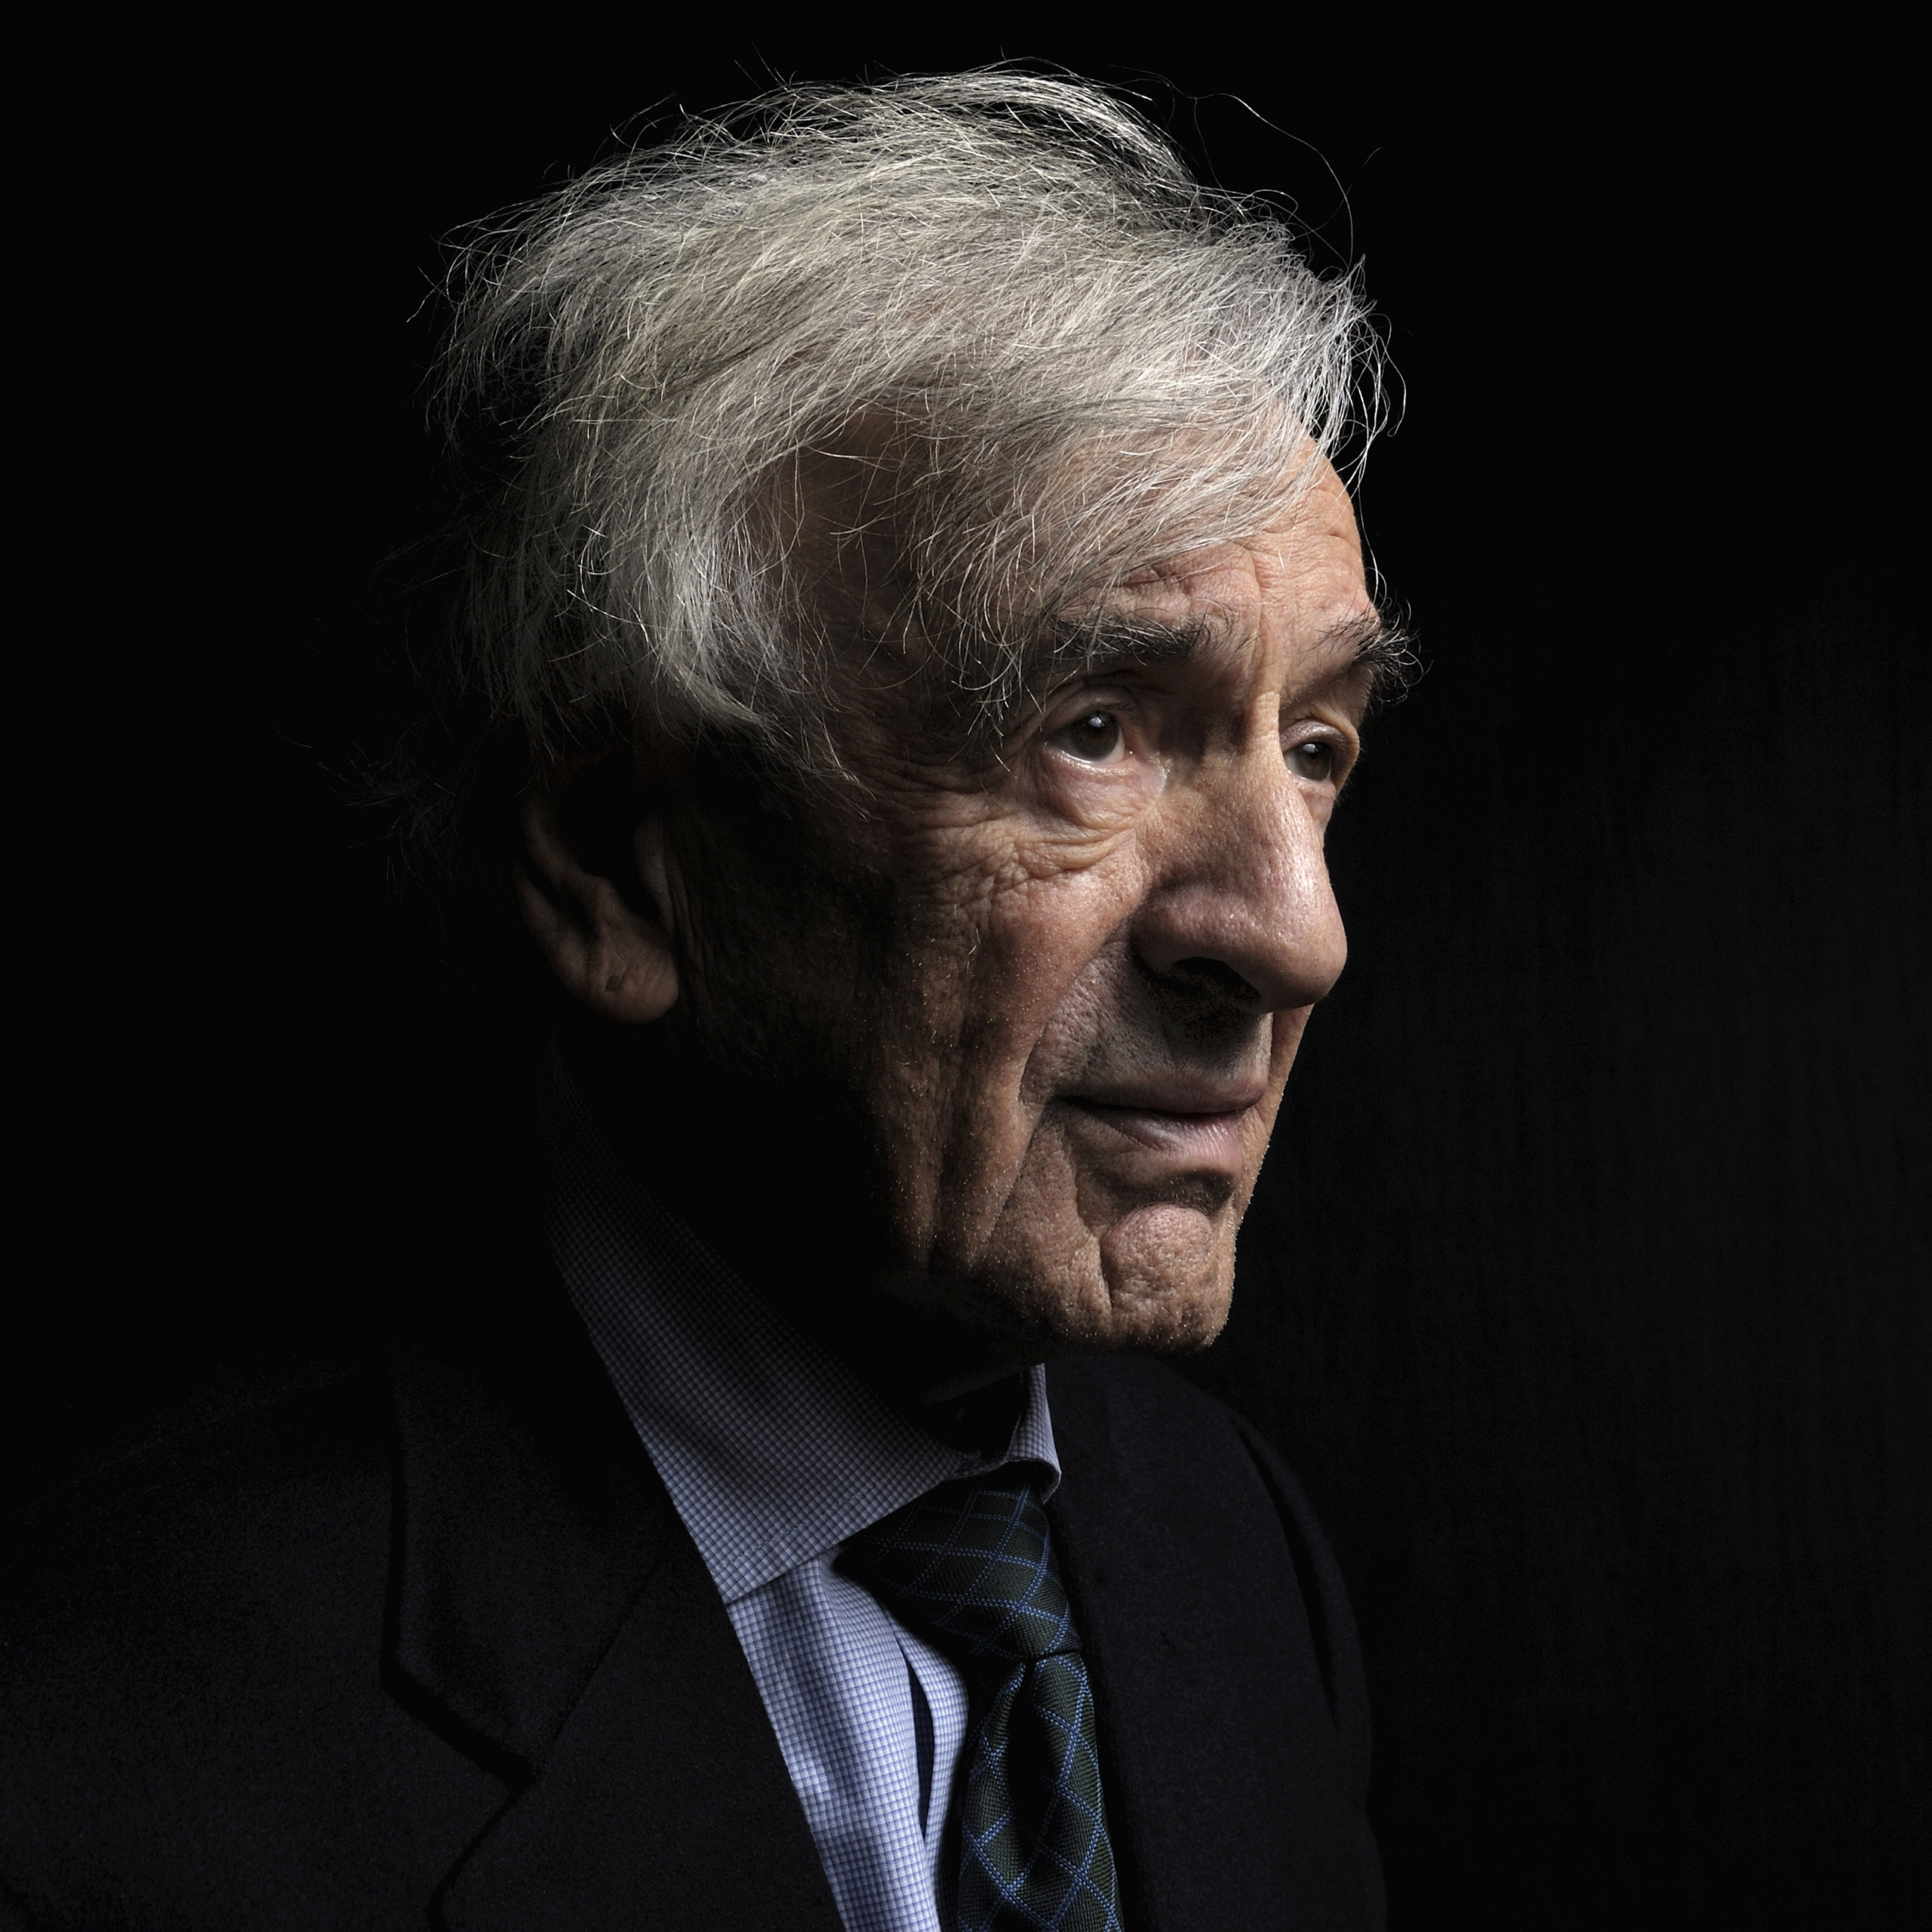 A portrait of Elie Wiesel, the writer and winner of the 1986 Nobel Peace Prize, in Paris on Nov. 30, 2011.